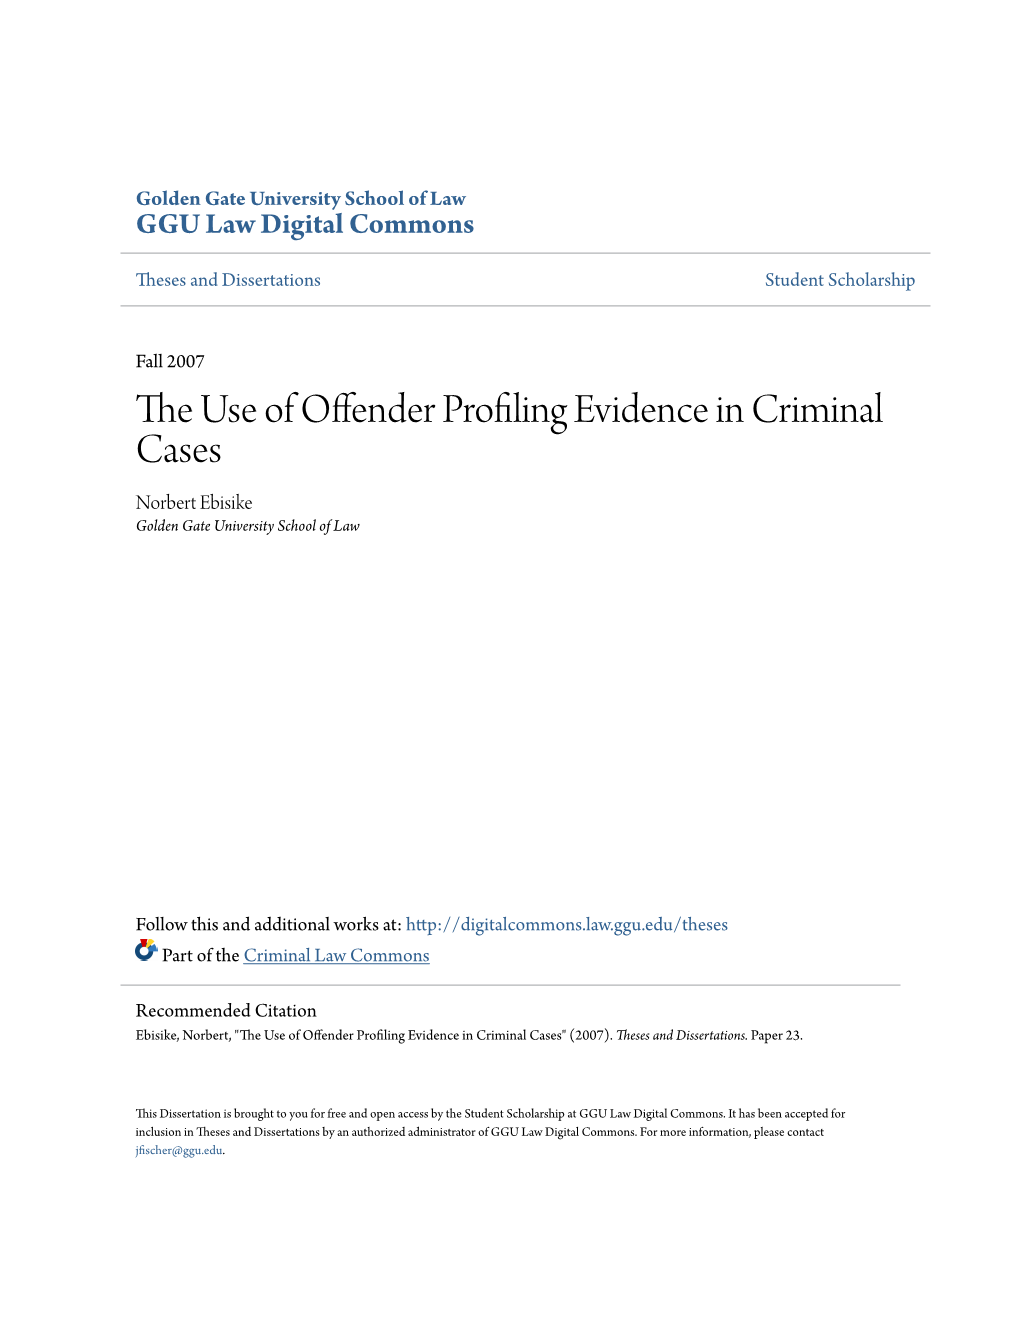 The Use of Offender Profiling Evidence in Criminal Cases